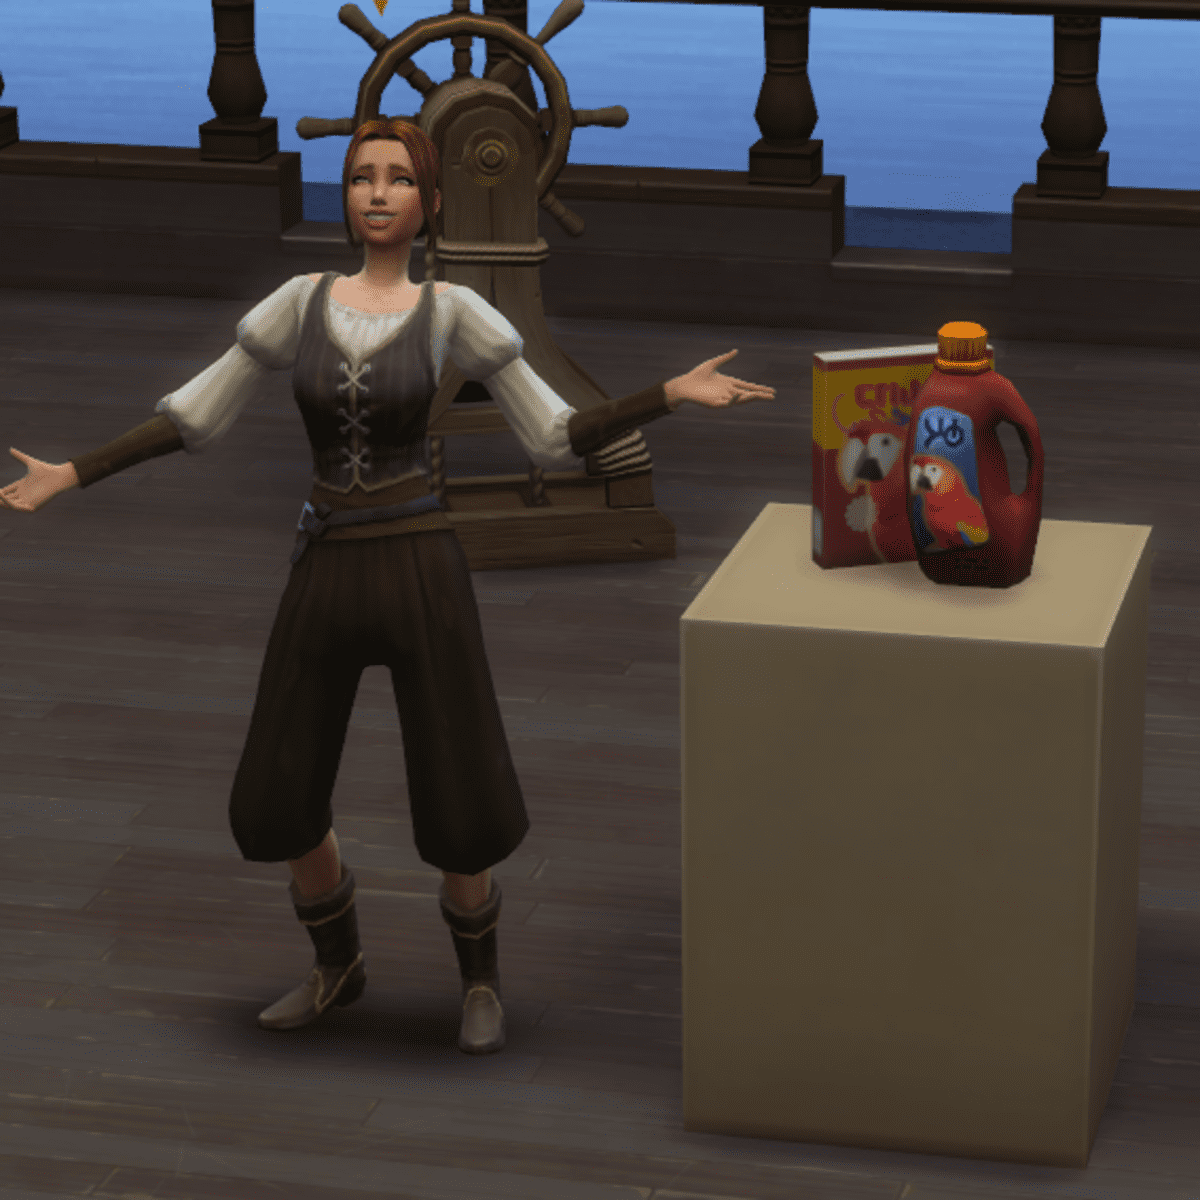 sims 4 get famous items